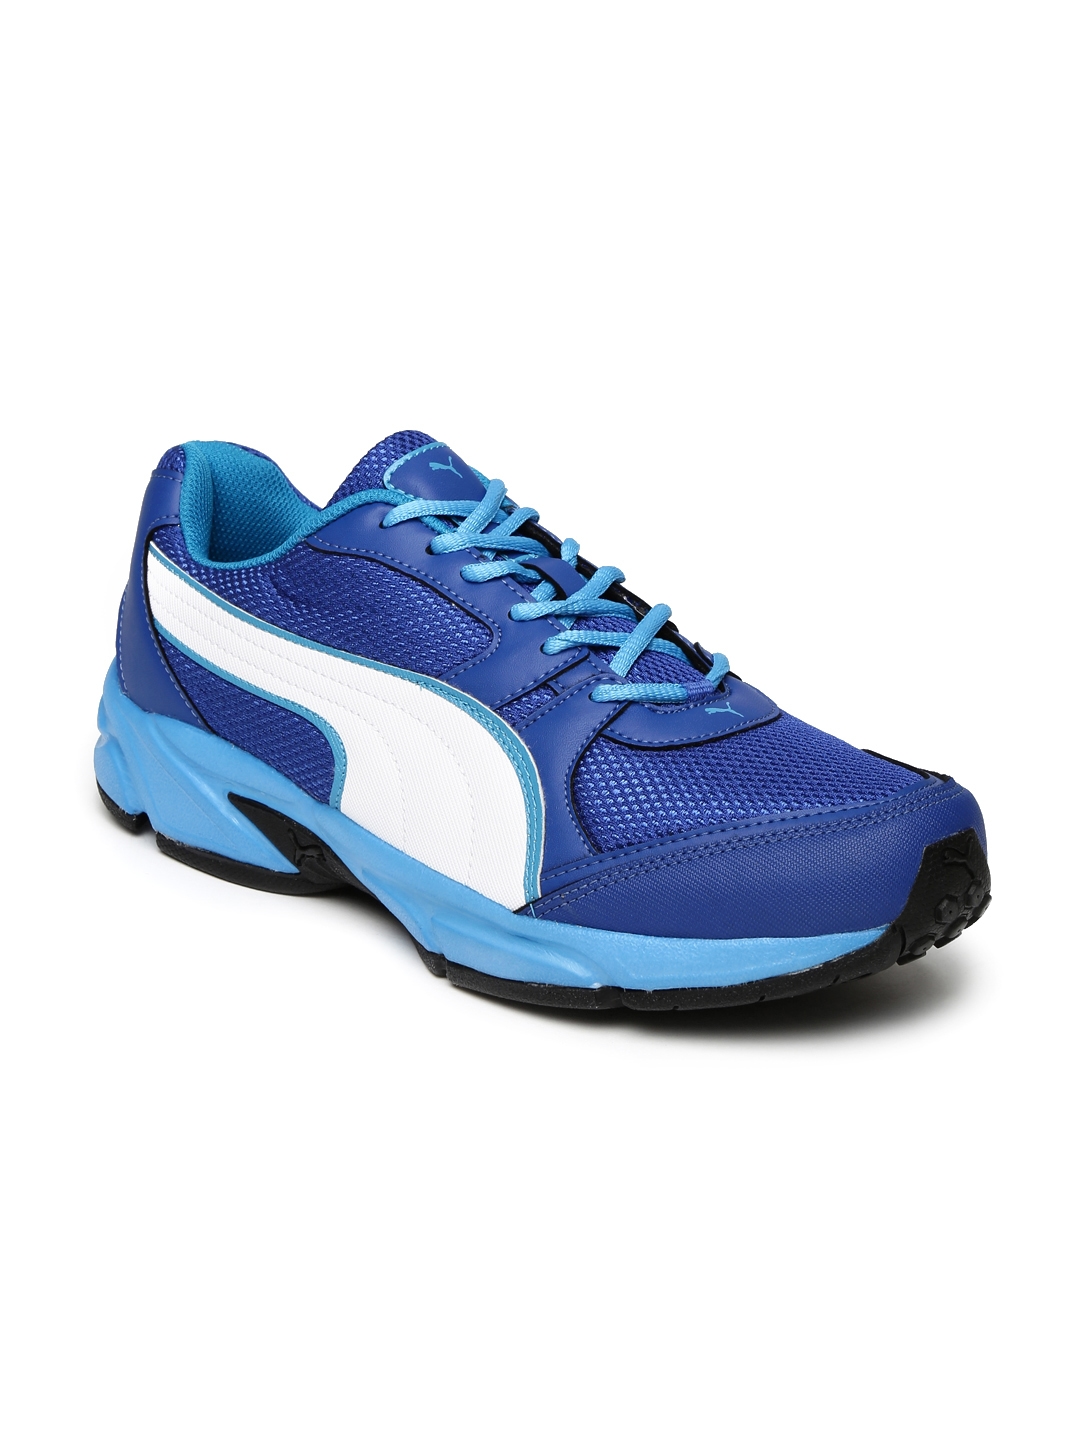 puma shoes india Sale,up to 76% Discounts